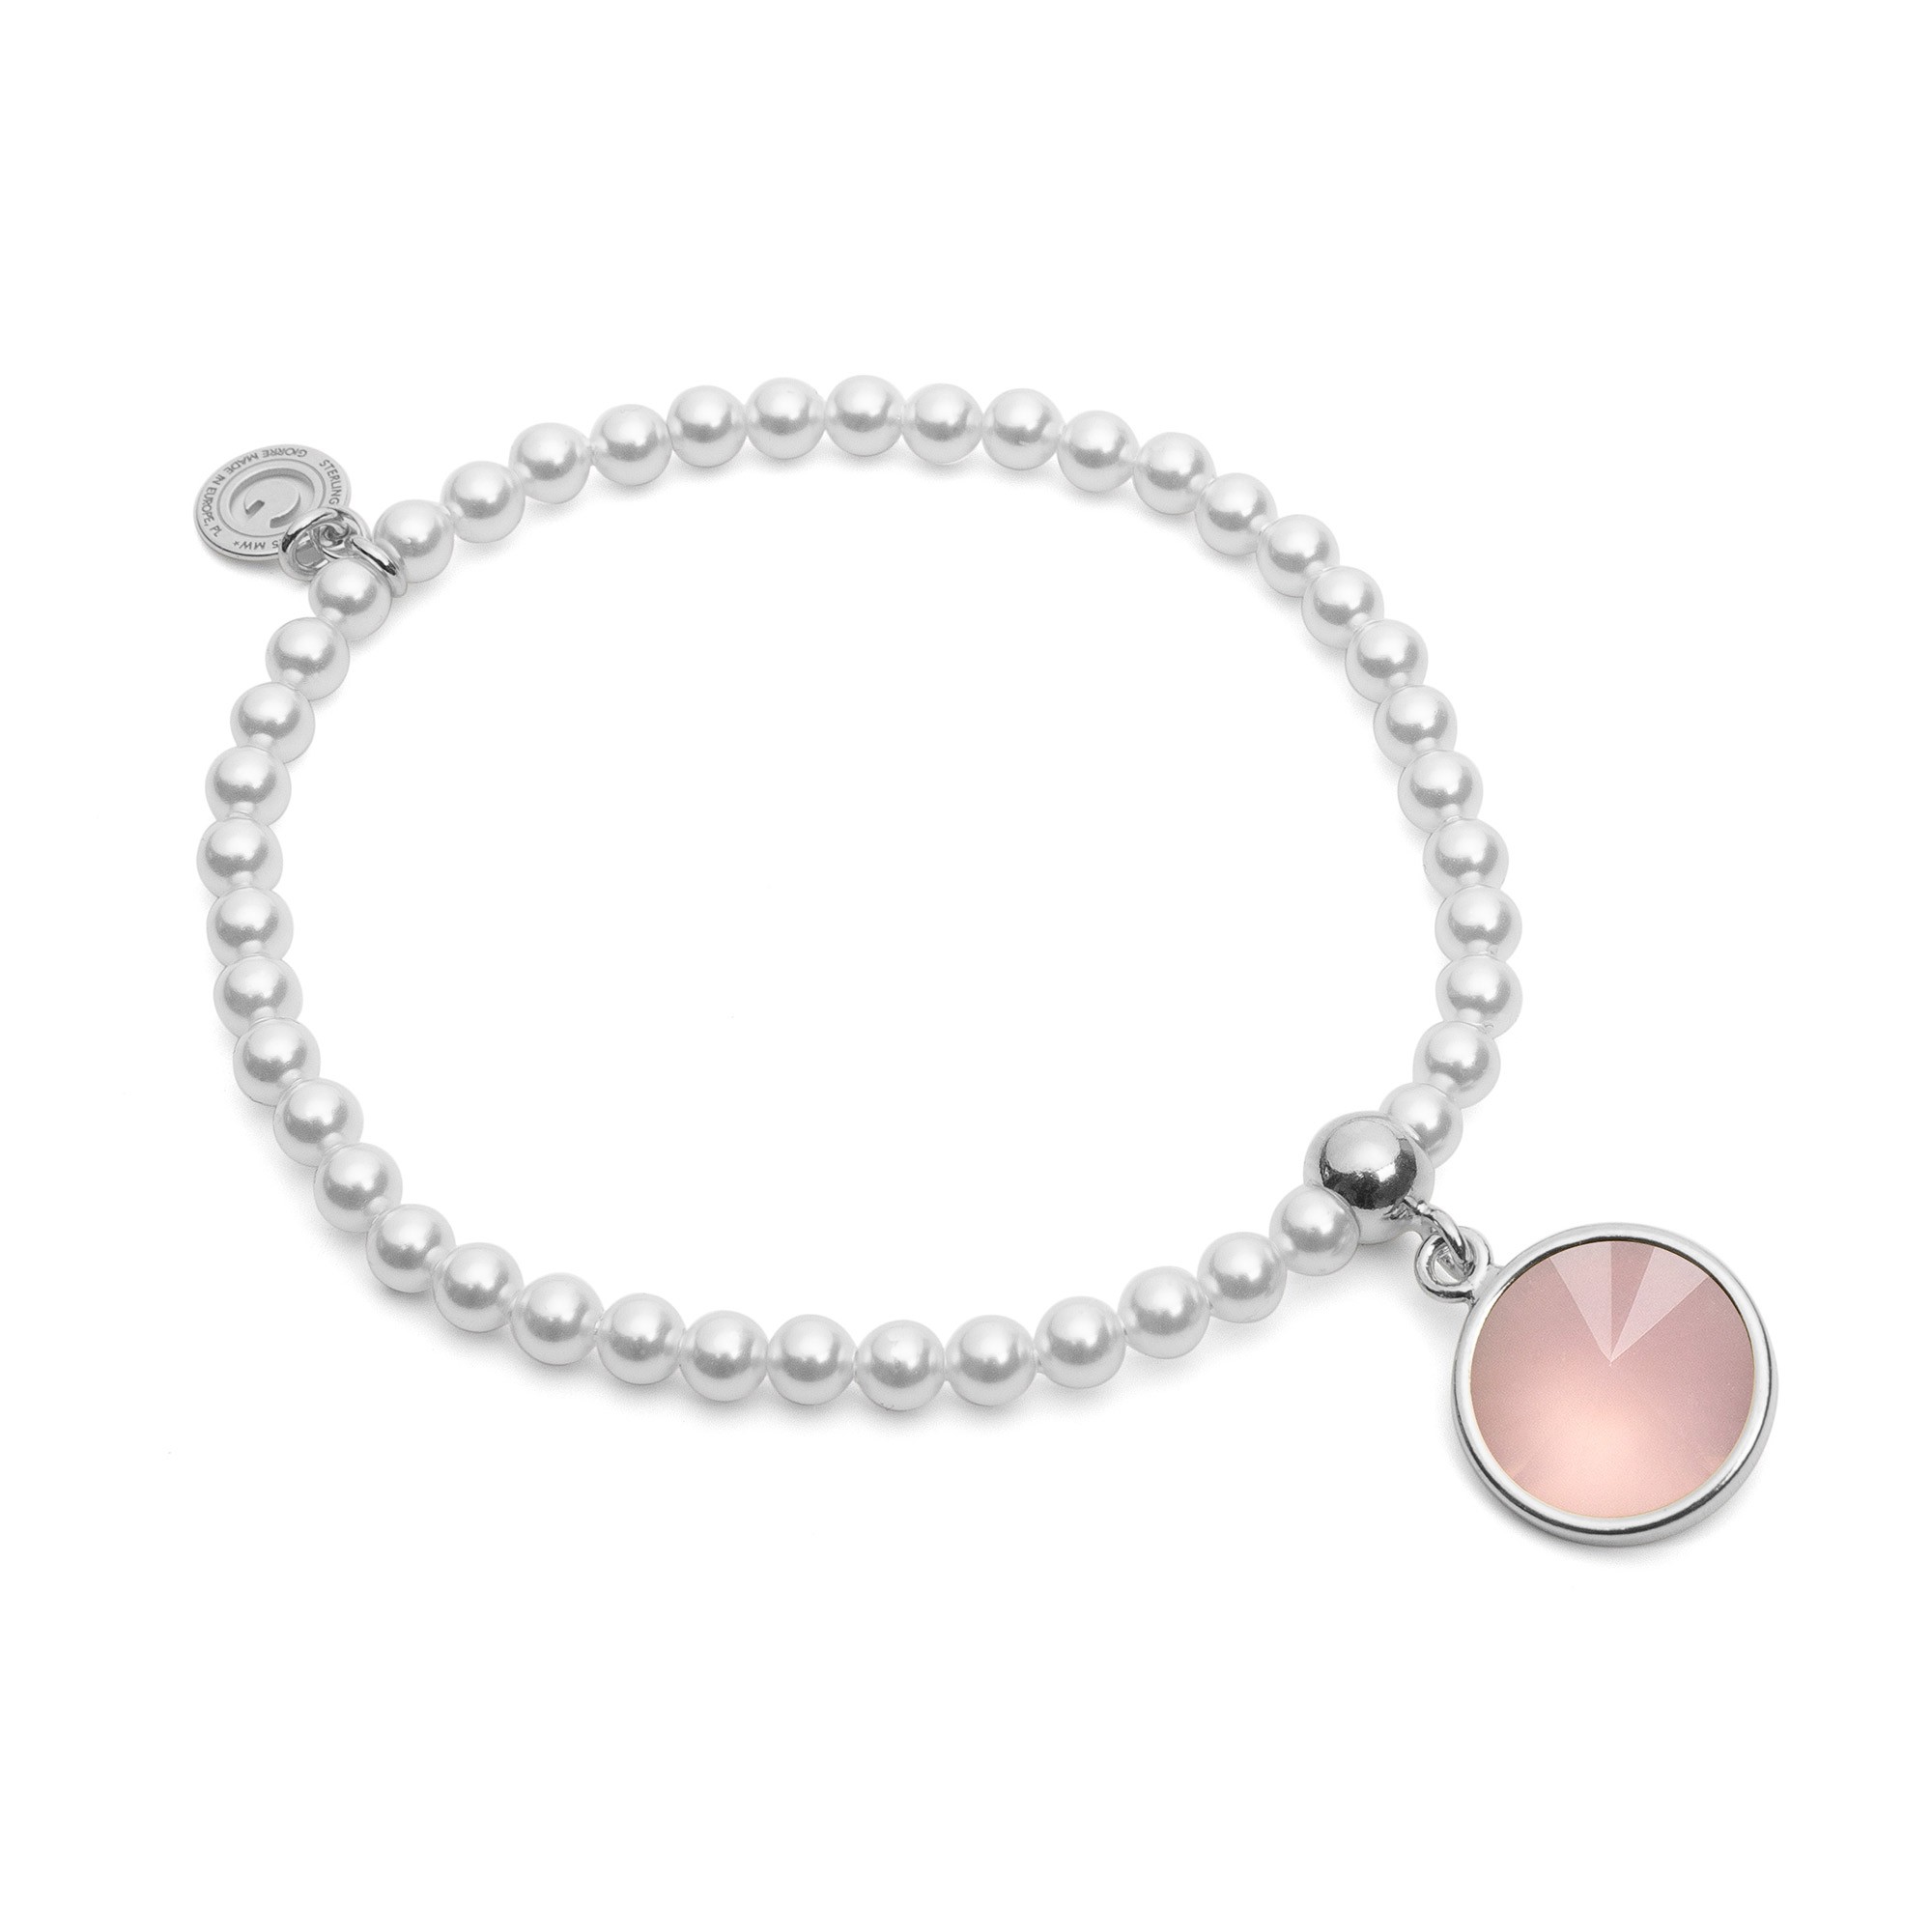 Elastic pearl bracelet with natural stone , sterling silver 925